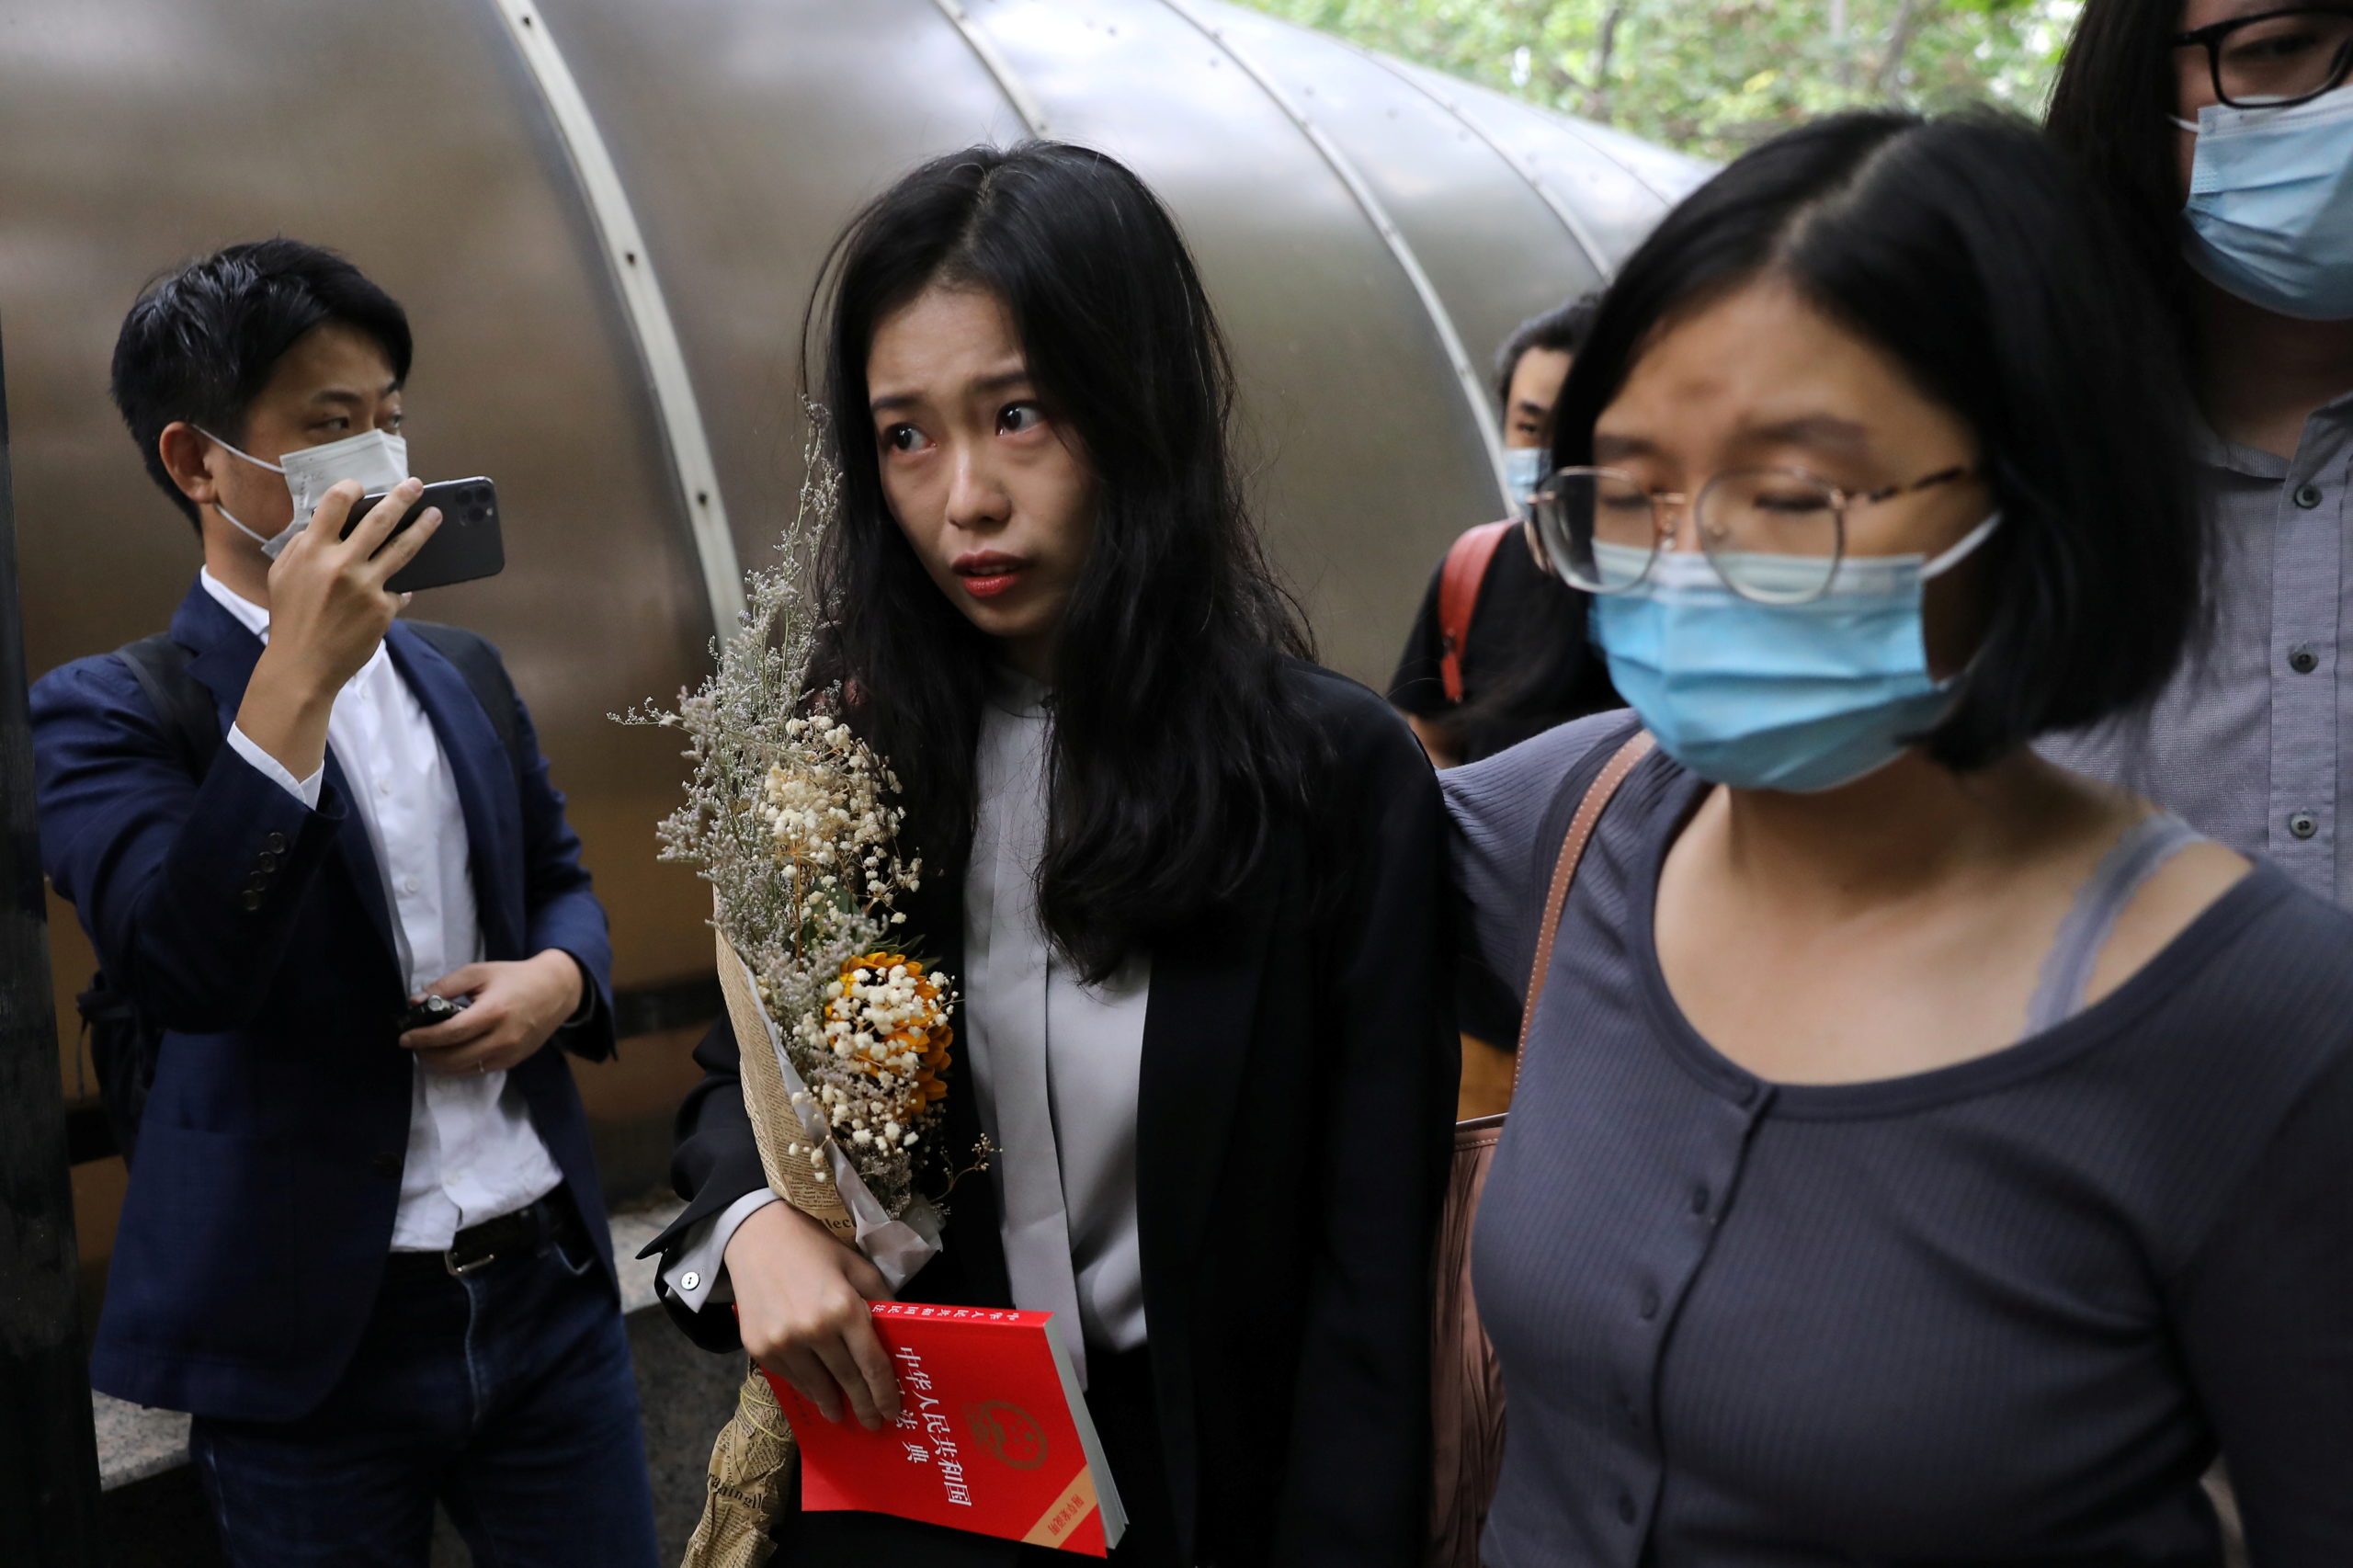 High profile Chinese #metoo case goes to court for another hearing, in Beijing